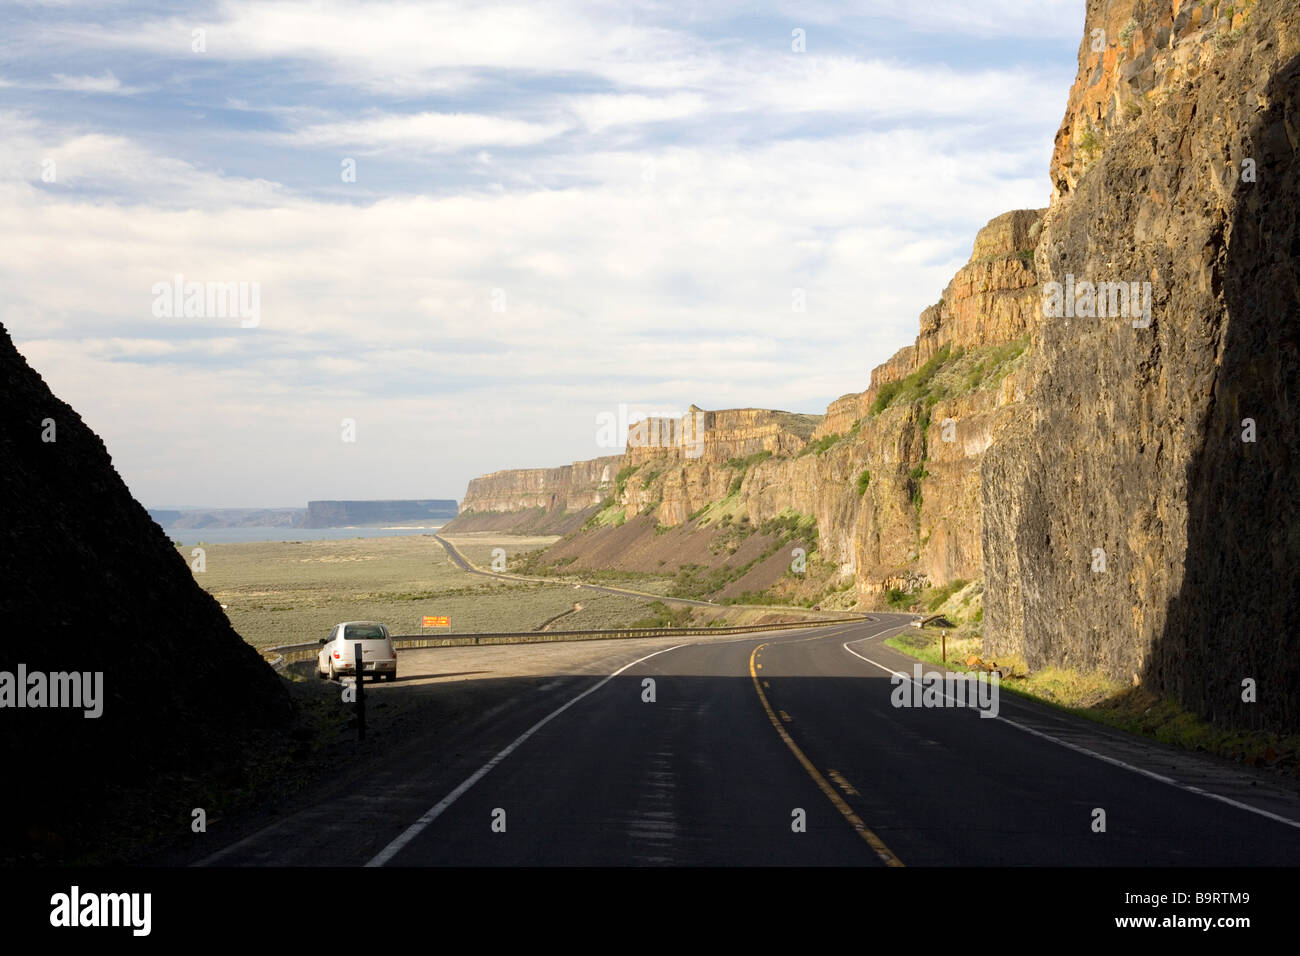 Coulee Corridor - Eastern Washington near Steamboat Rock State Park Stock Photo